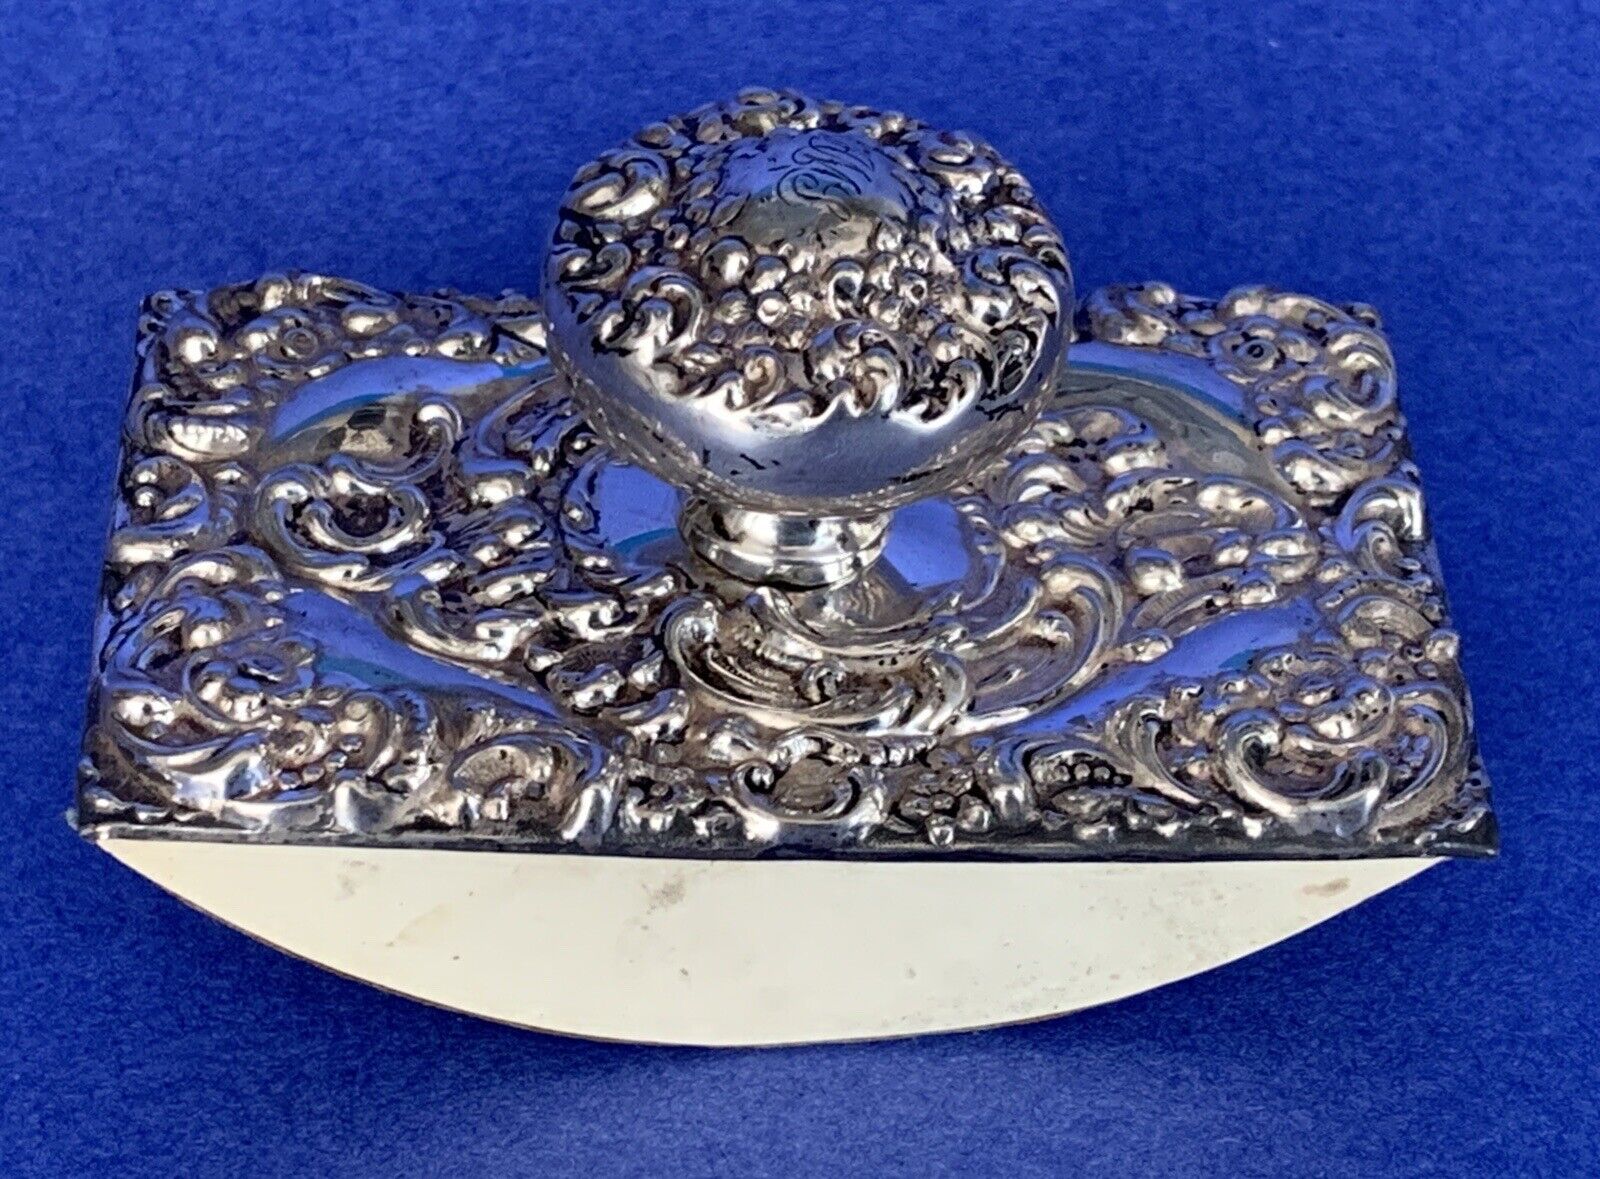 ANTIQUE-UNGER BROS.-STERLING SILVER-ROCOCO-REPOUSSE-INK BLOTTER-EXCELLENT